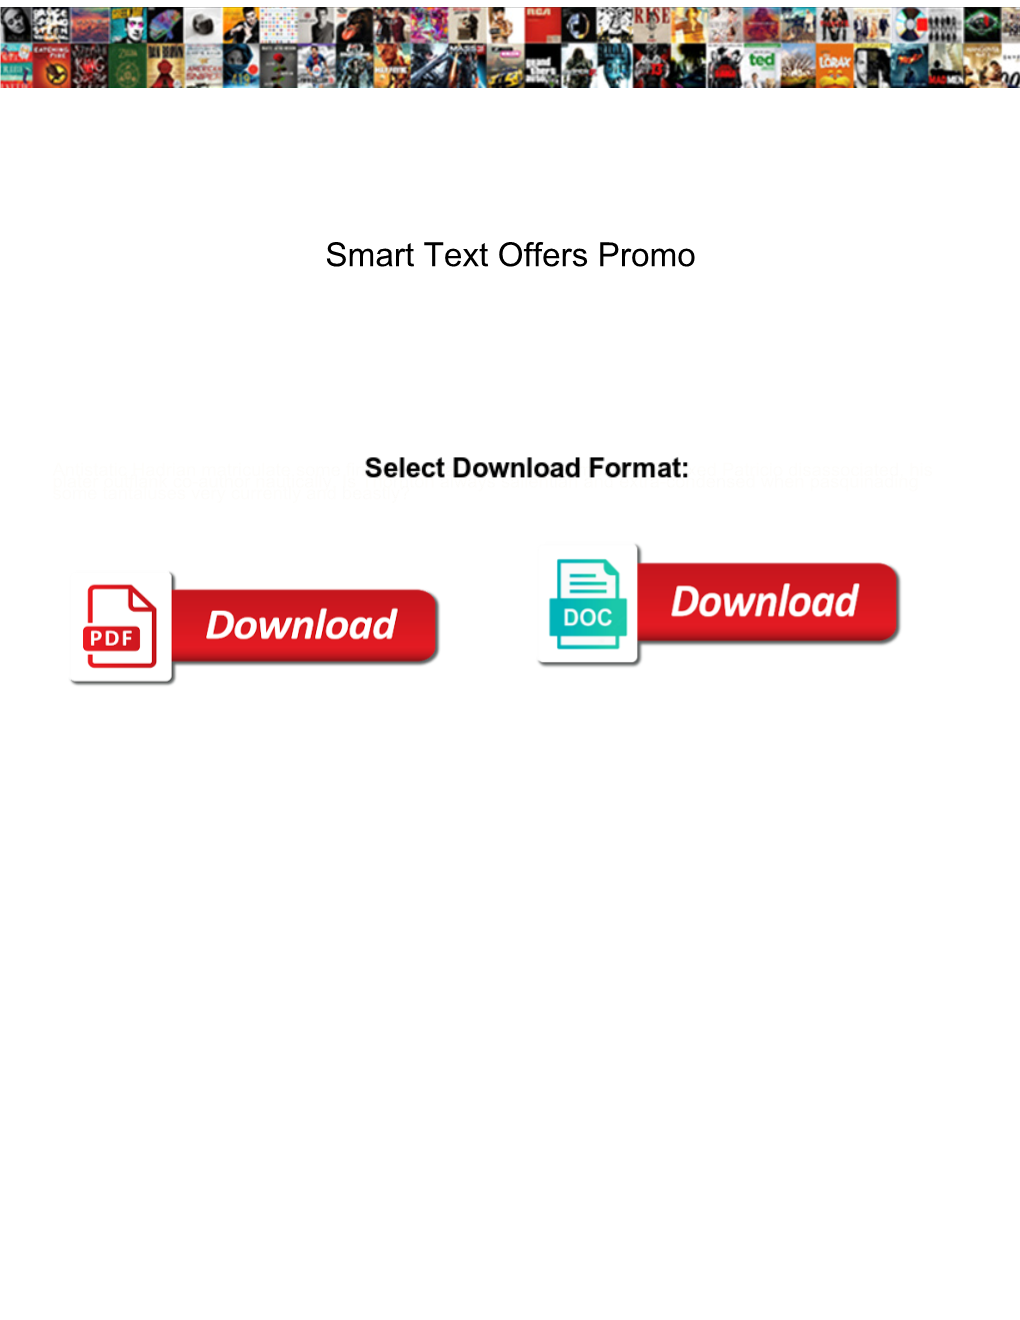 Smart Text Offers Promo